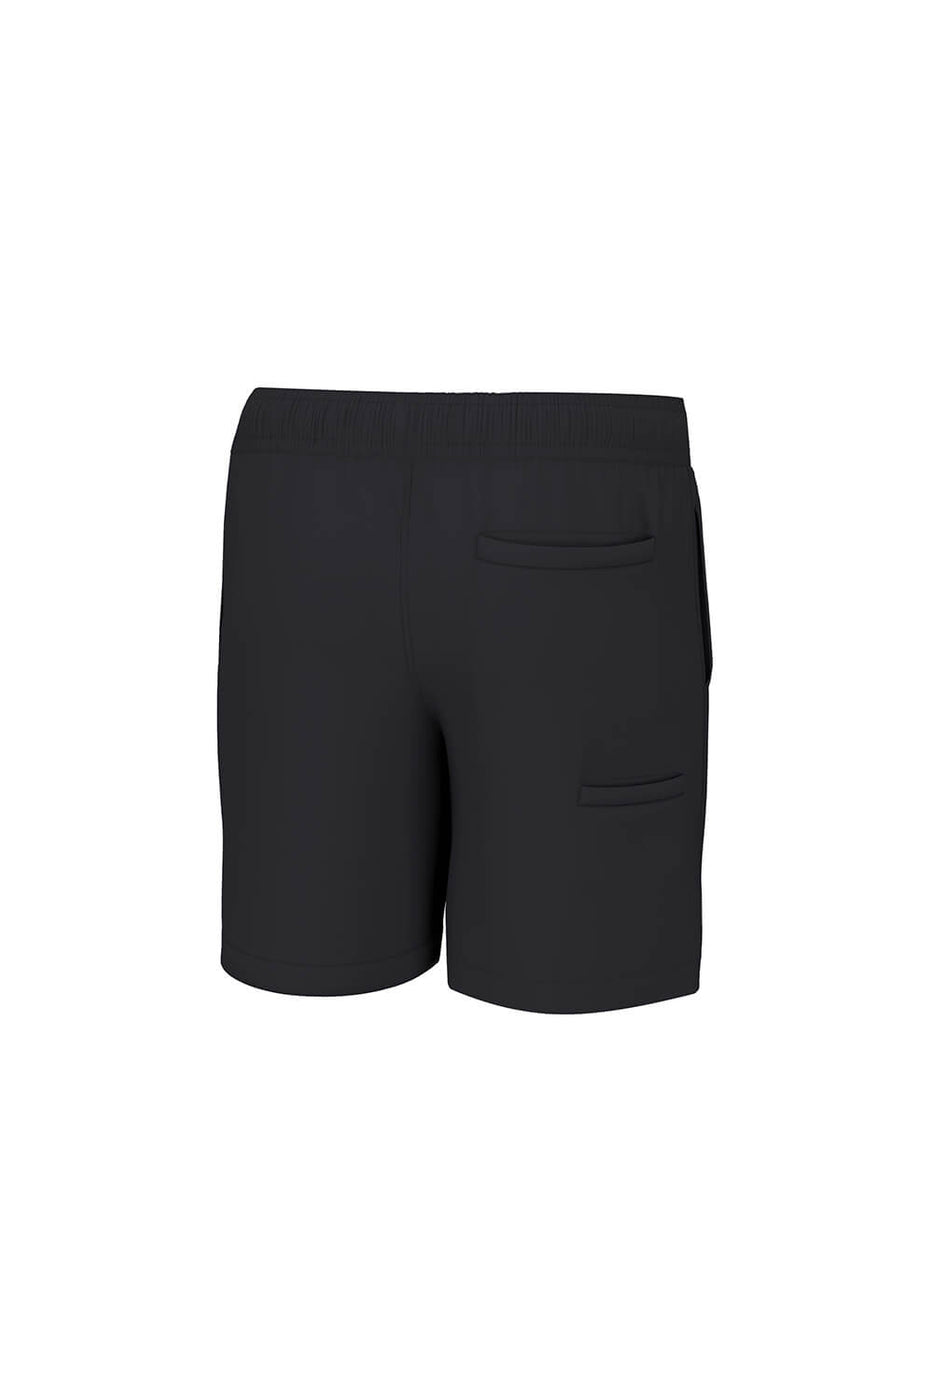 Huk Fishing Youth Pursuit Volley Shorts for Boys in Black